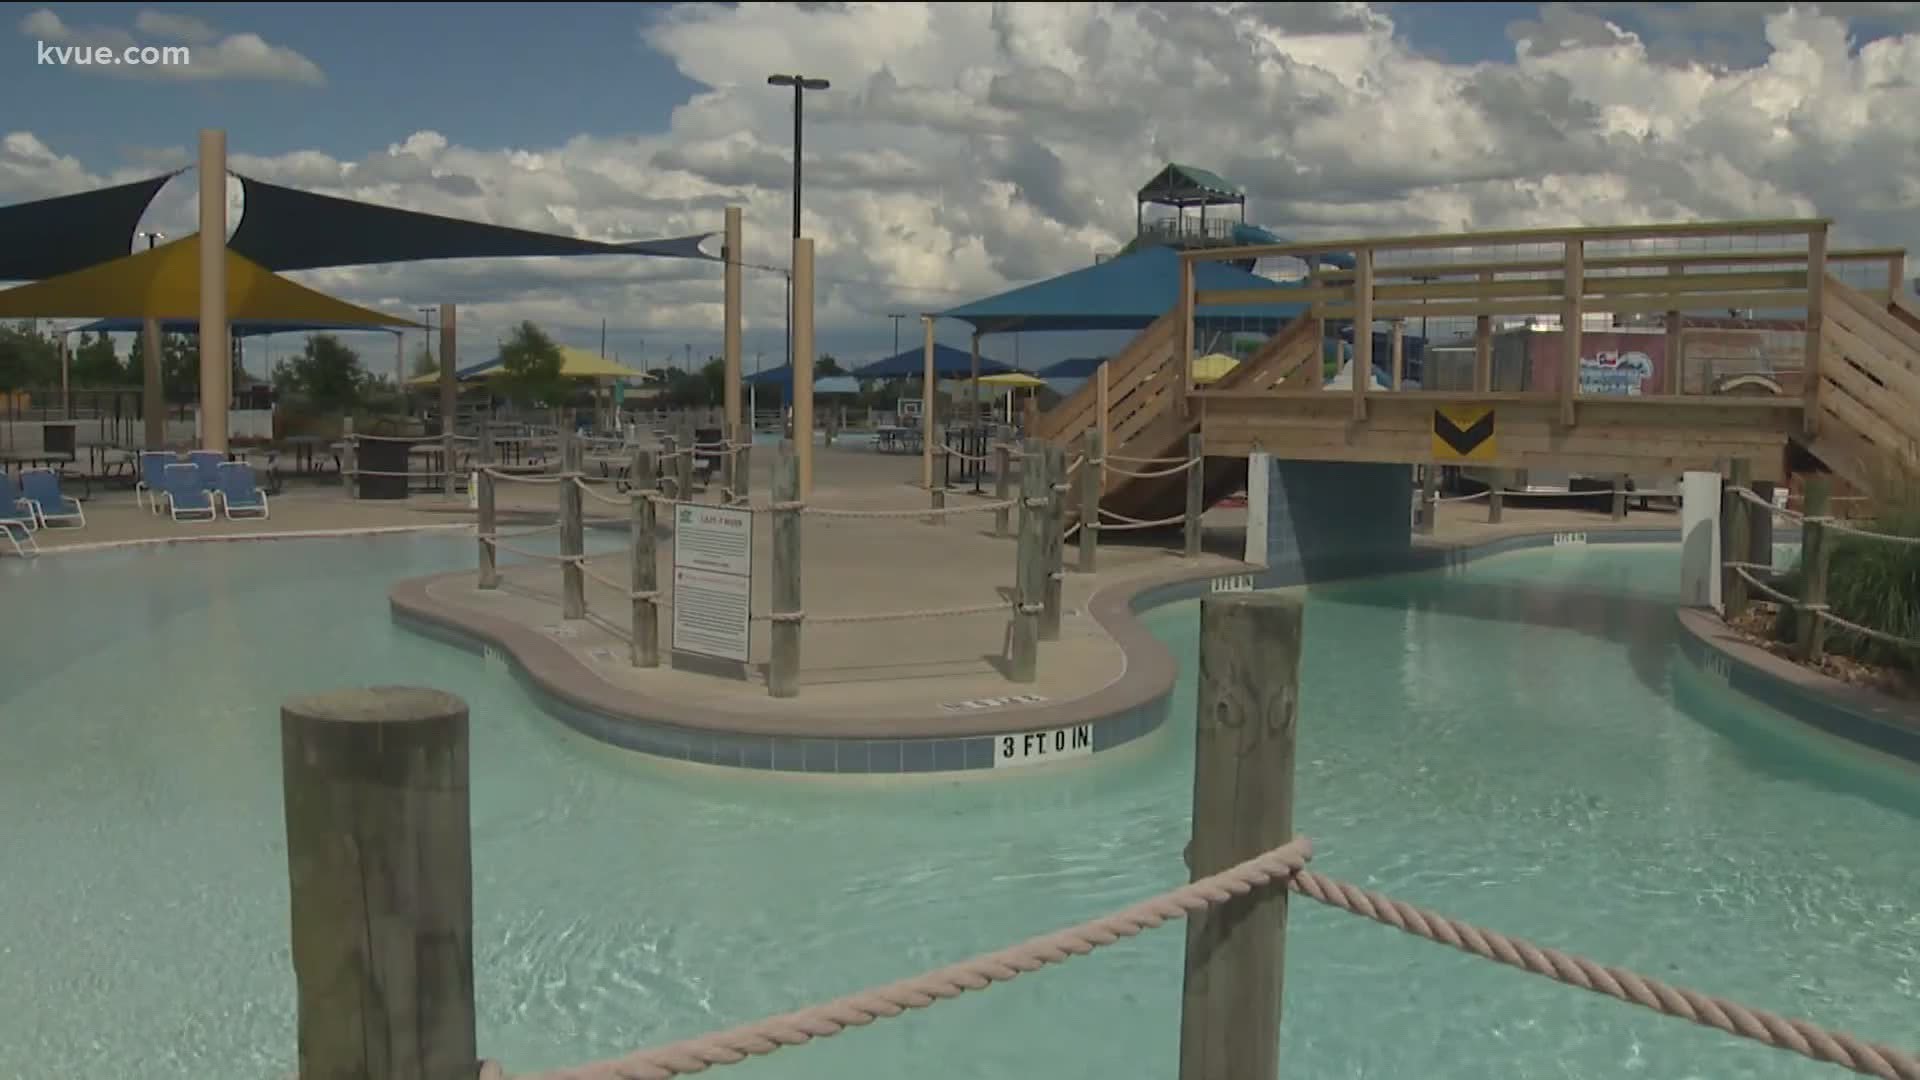 Texas water parks can open at 25% capacity starting Friday.